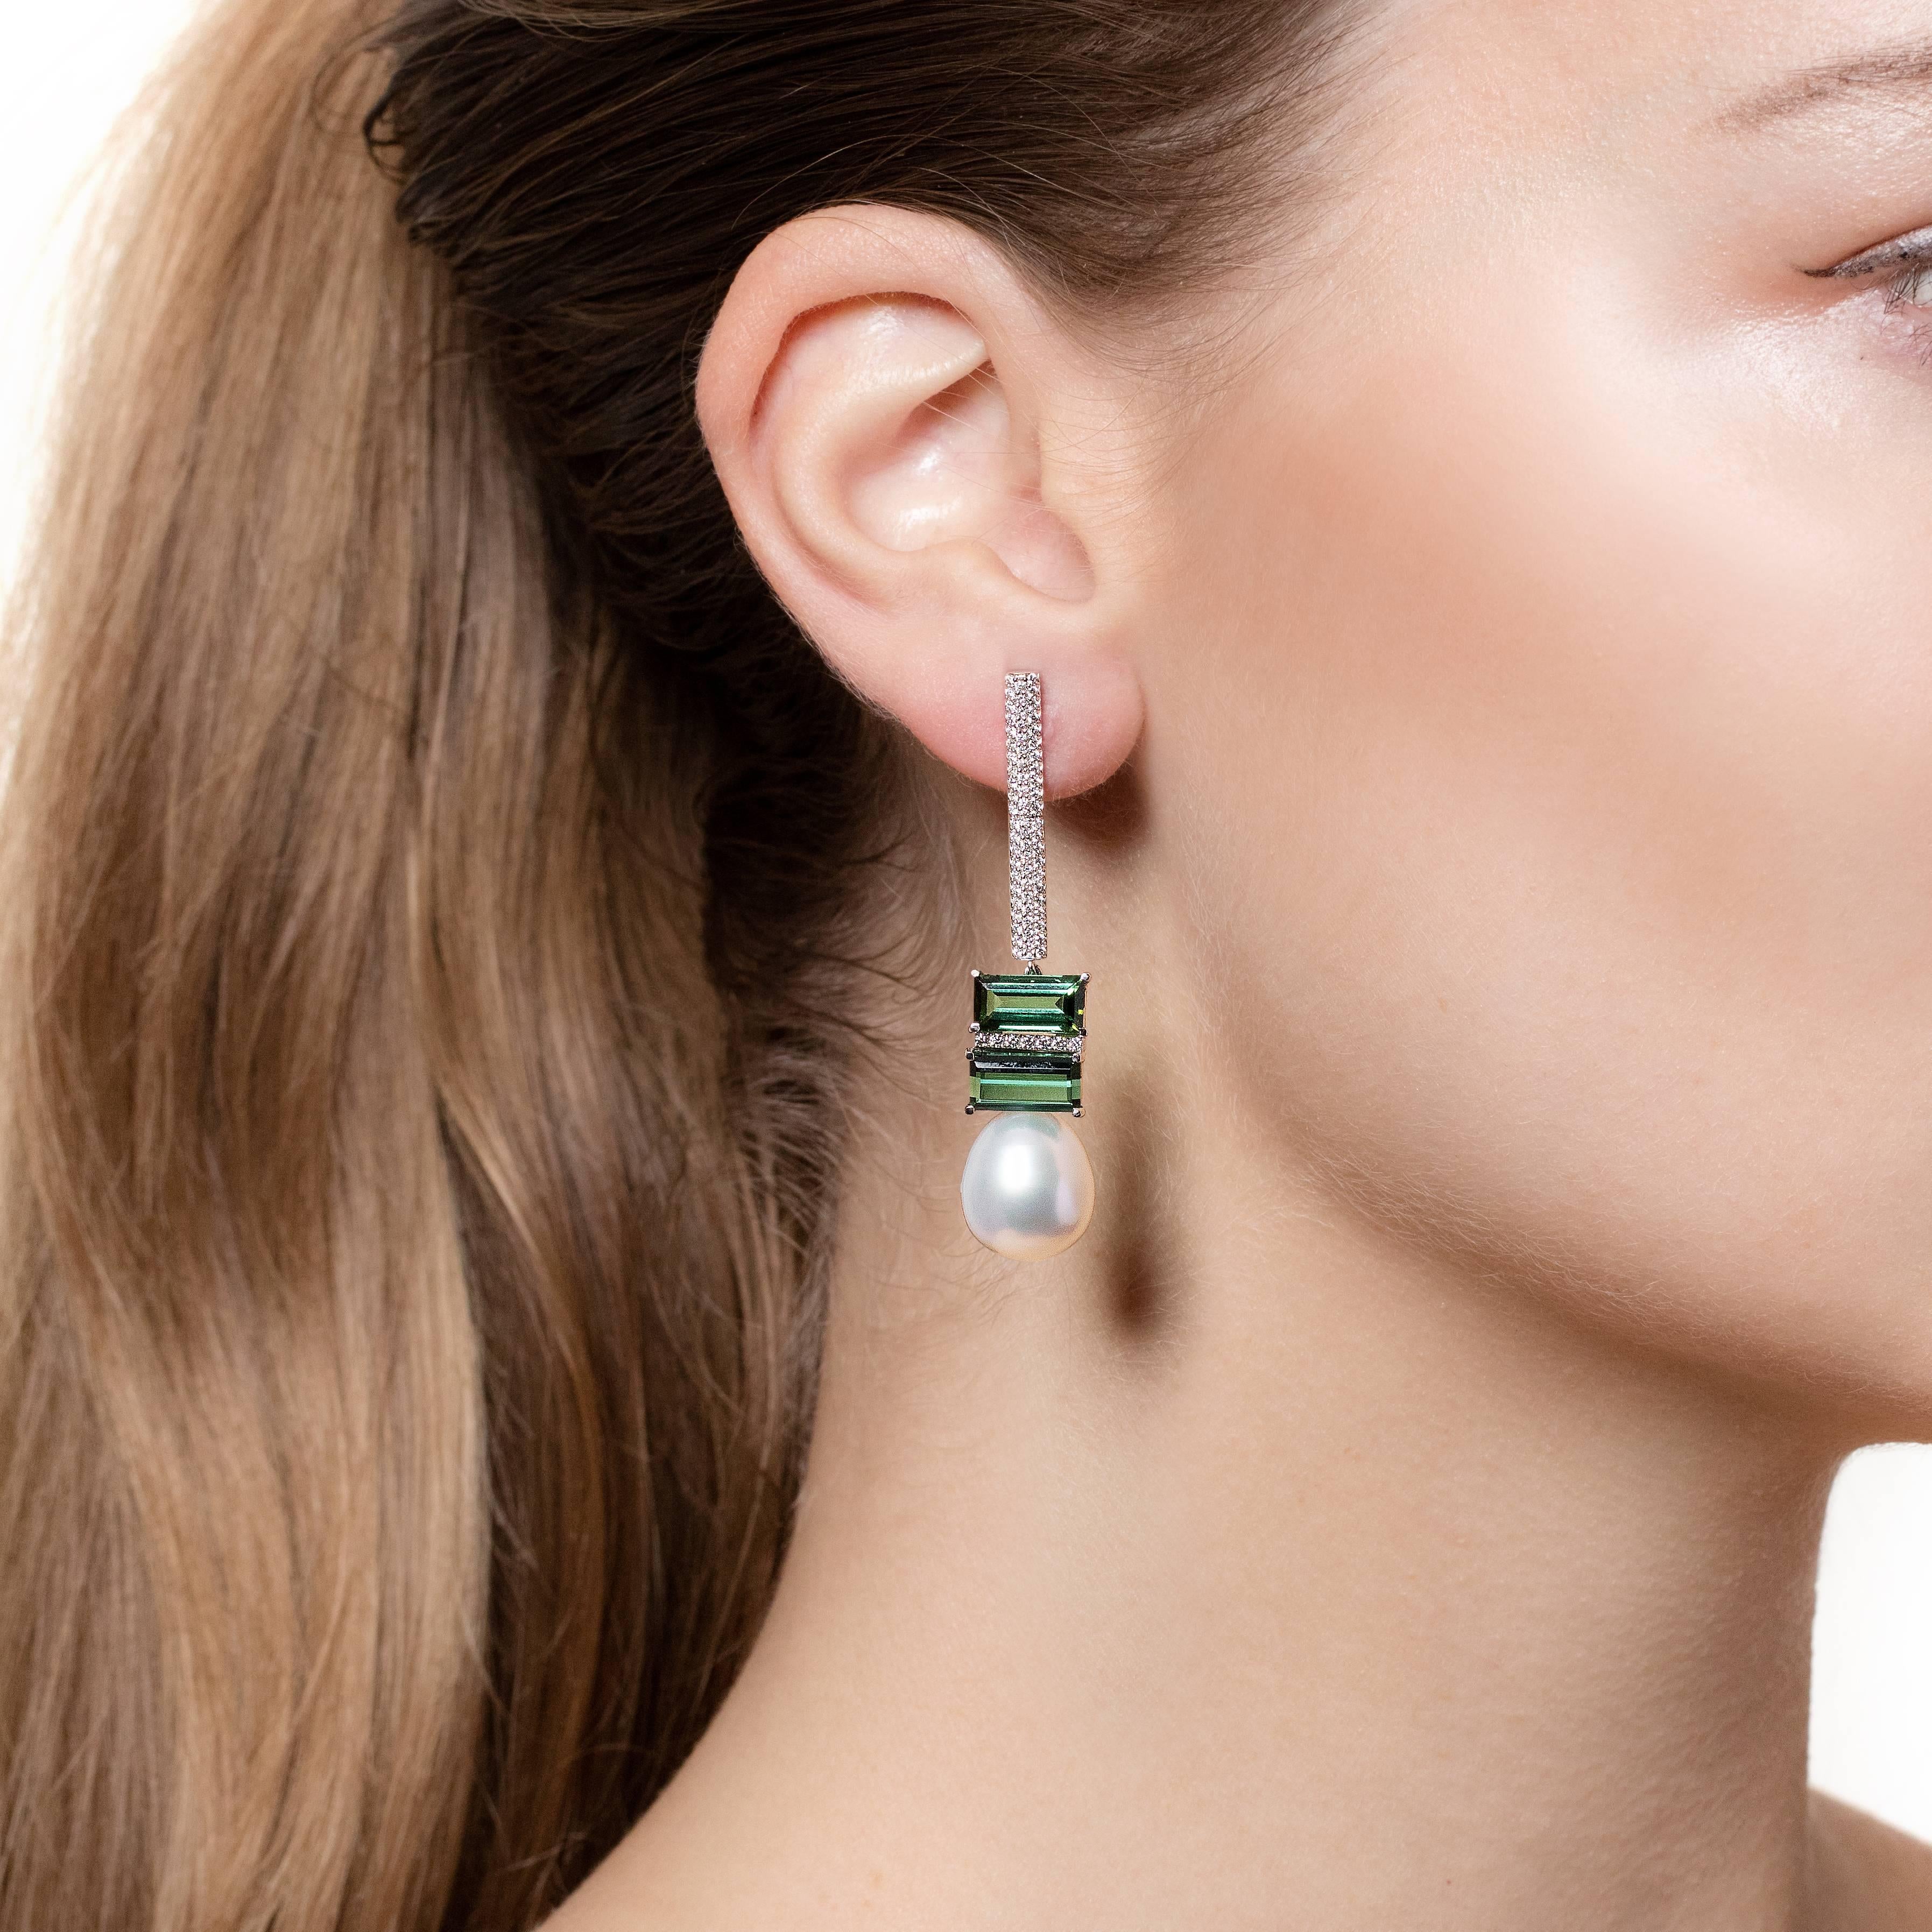 18K white gold (7.0g), 4 green baguette-cut tourmalines 8.00ct., 2 white South Sea drop pearls, 146 white round-cut diamonds 0.80ct.

A pair of outstanding white gold and green baguette tourmaline, South Sea peal and diamond long earrings. The Elle